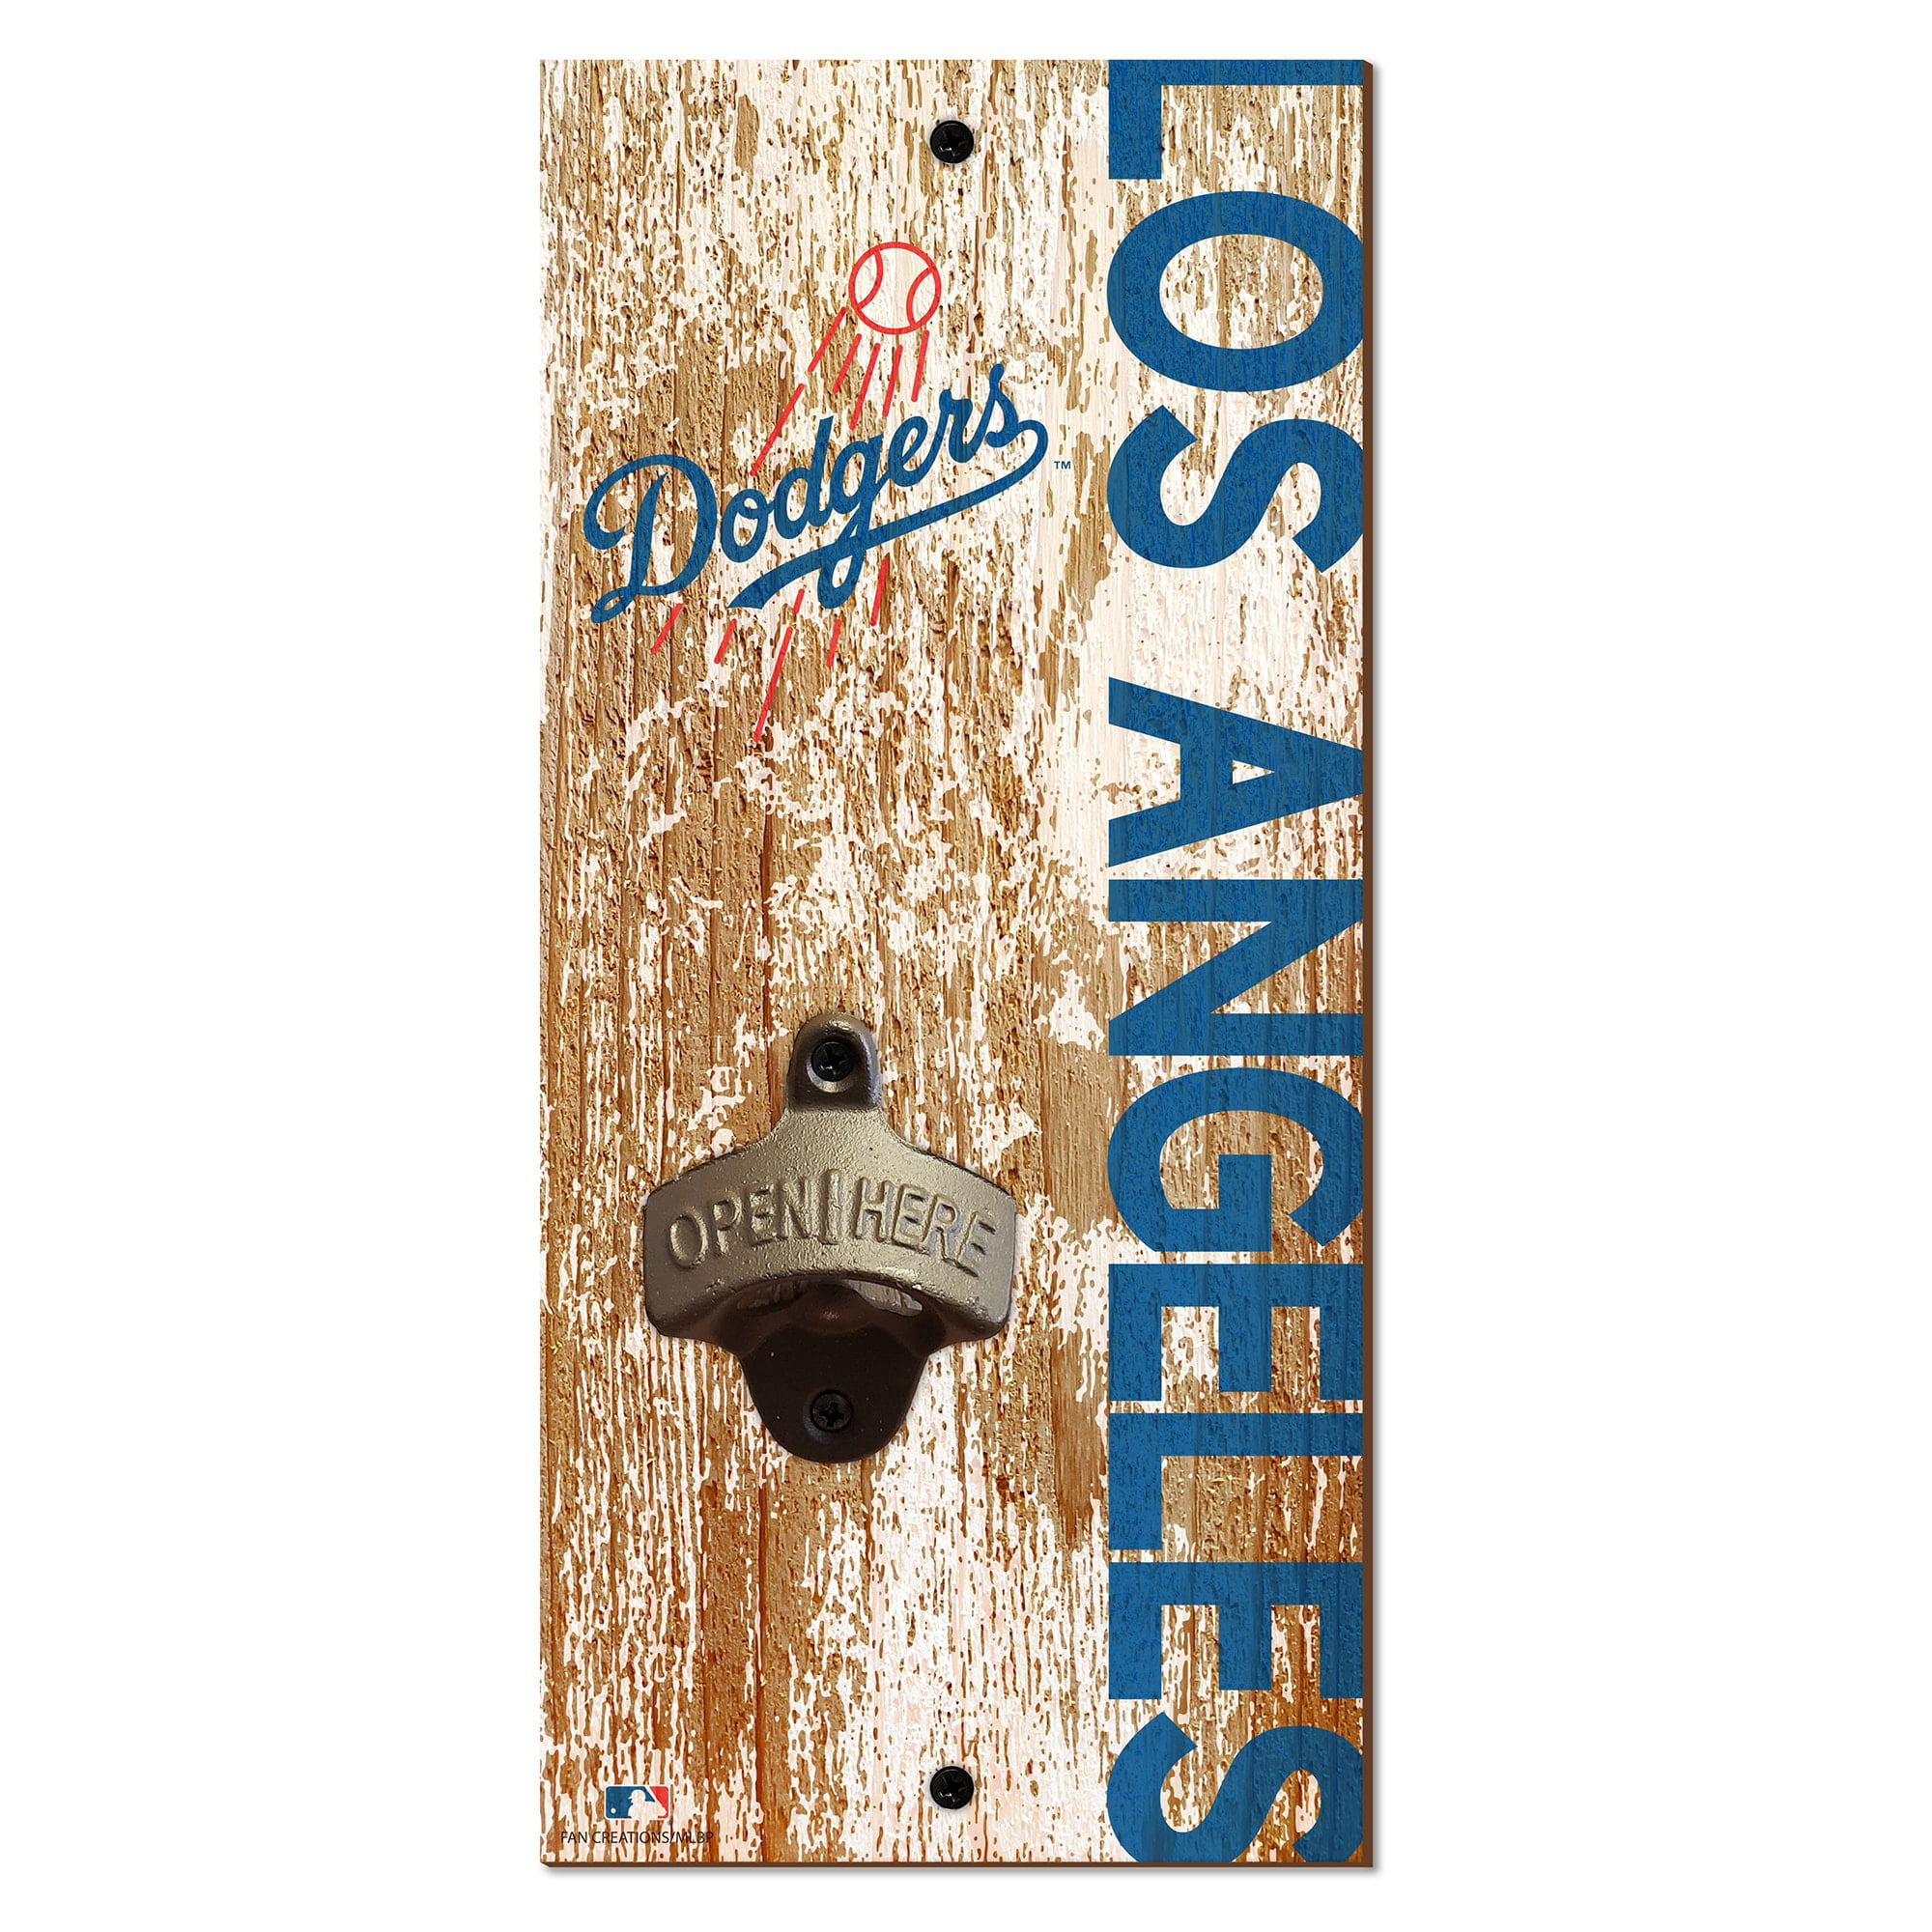 Loungefly La Dodgers Patches Accordion Wallet MLB